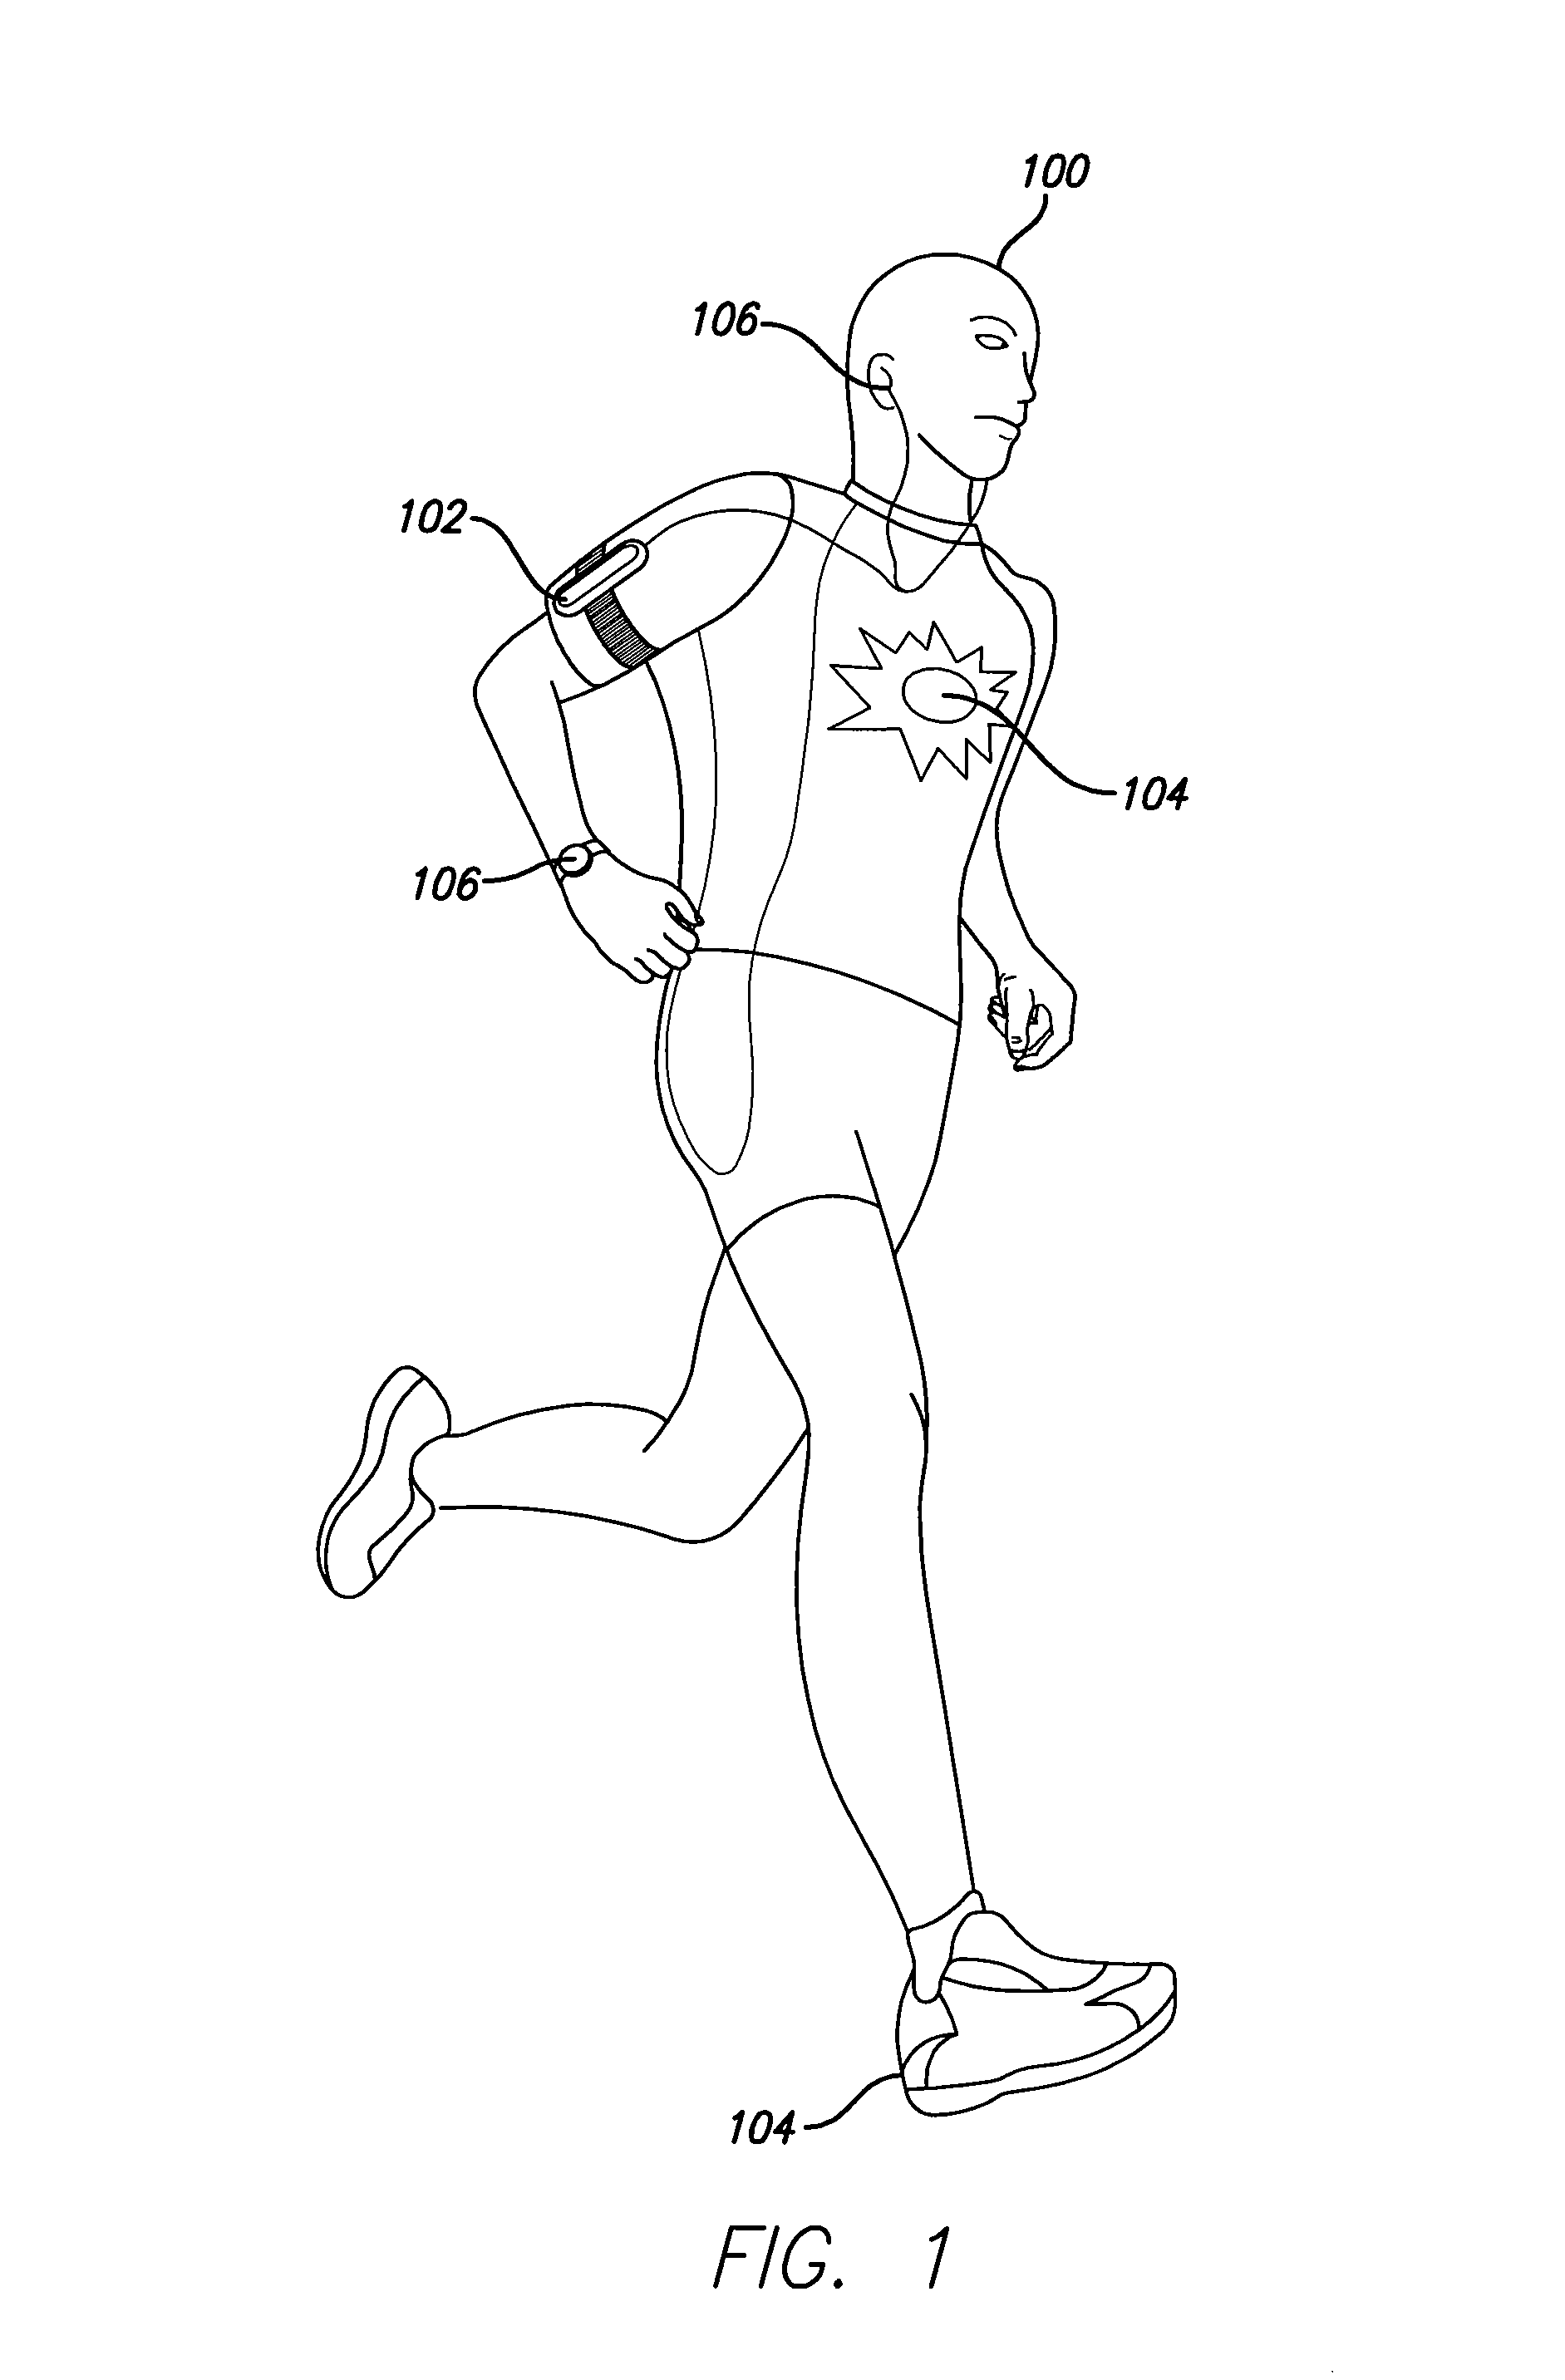 Program products, methods, and systems for providing fitness monitoring services